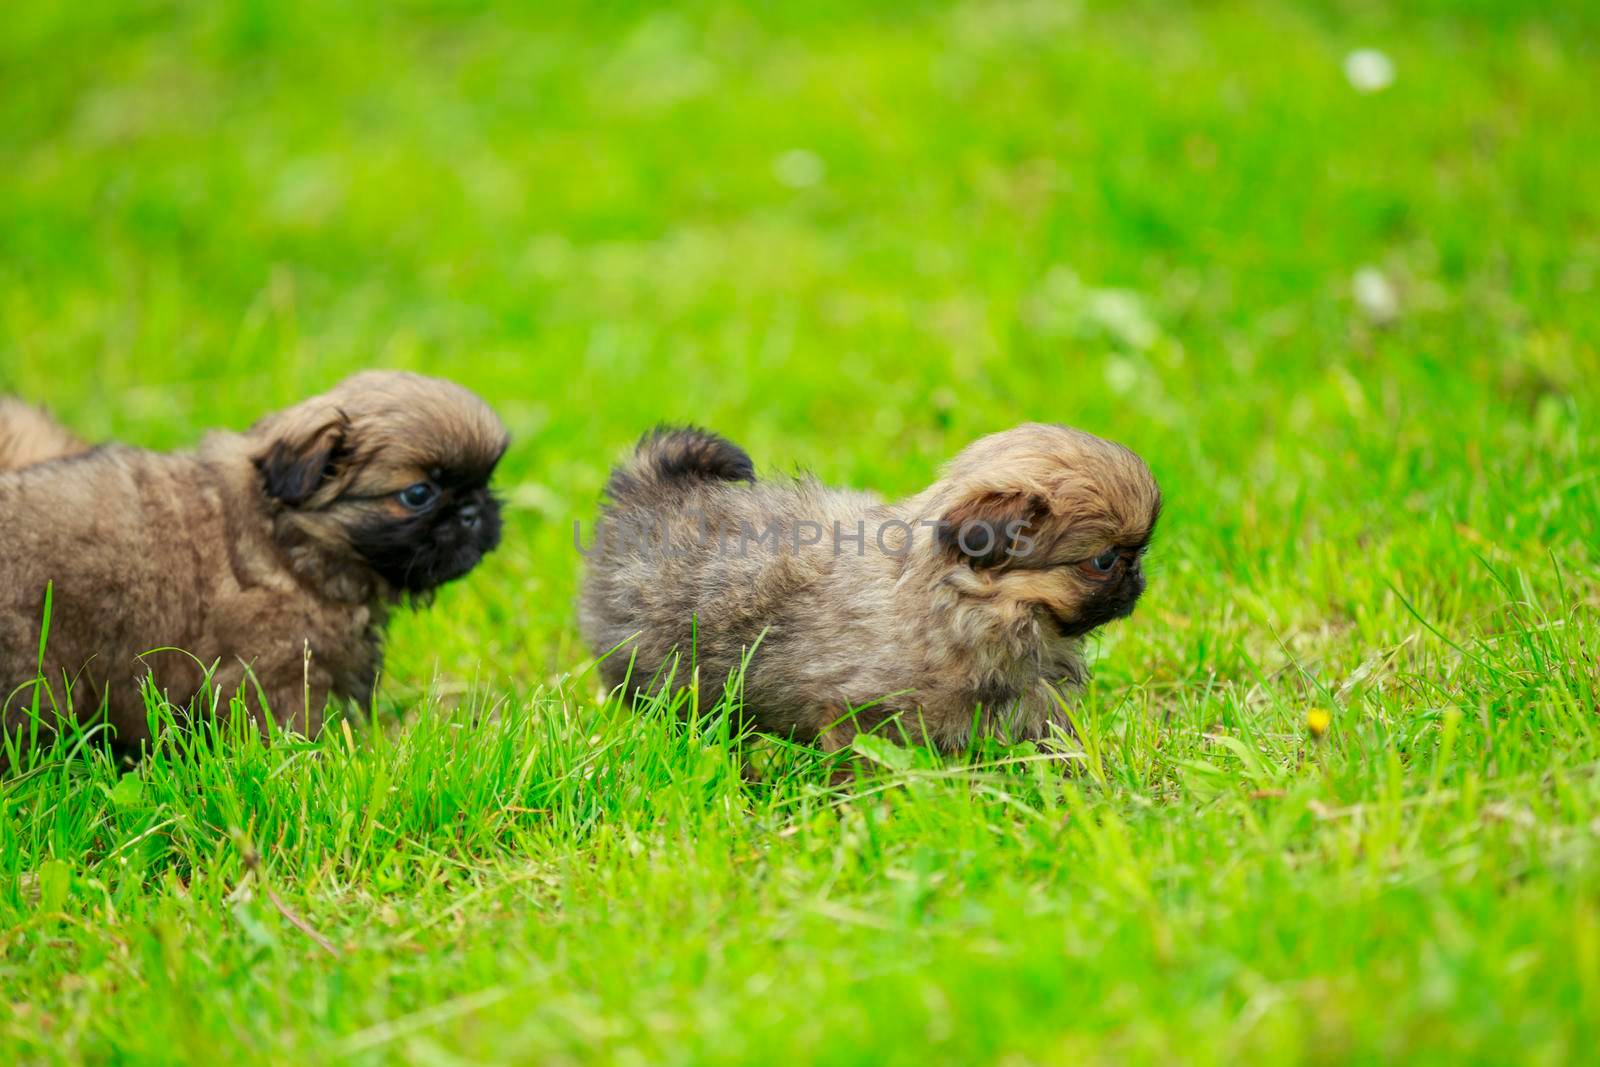 Pekingese puppies are playing on the lawn